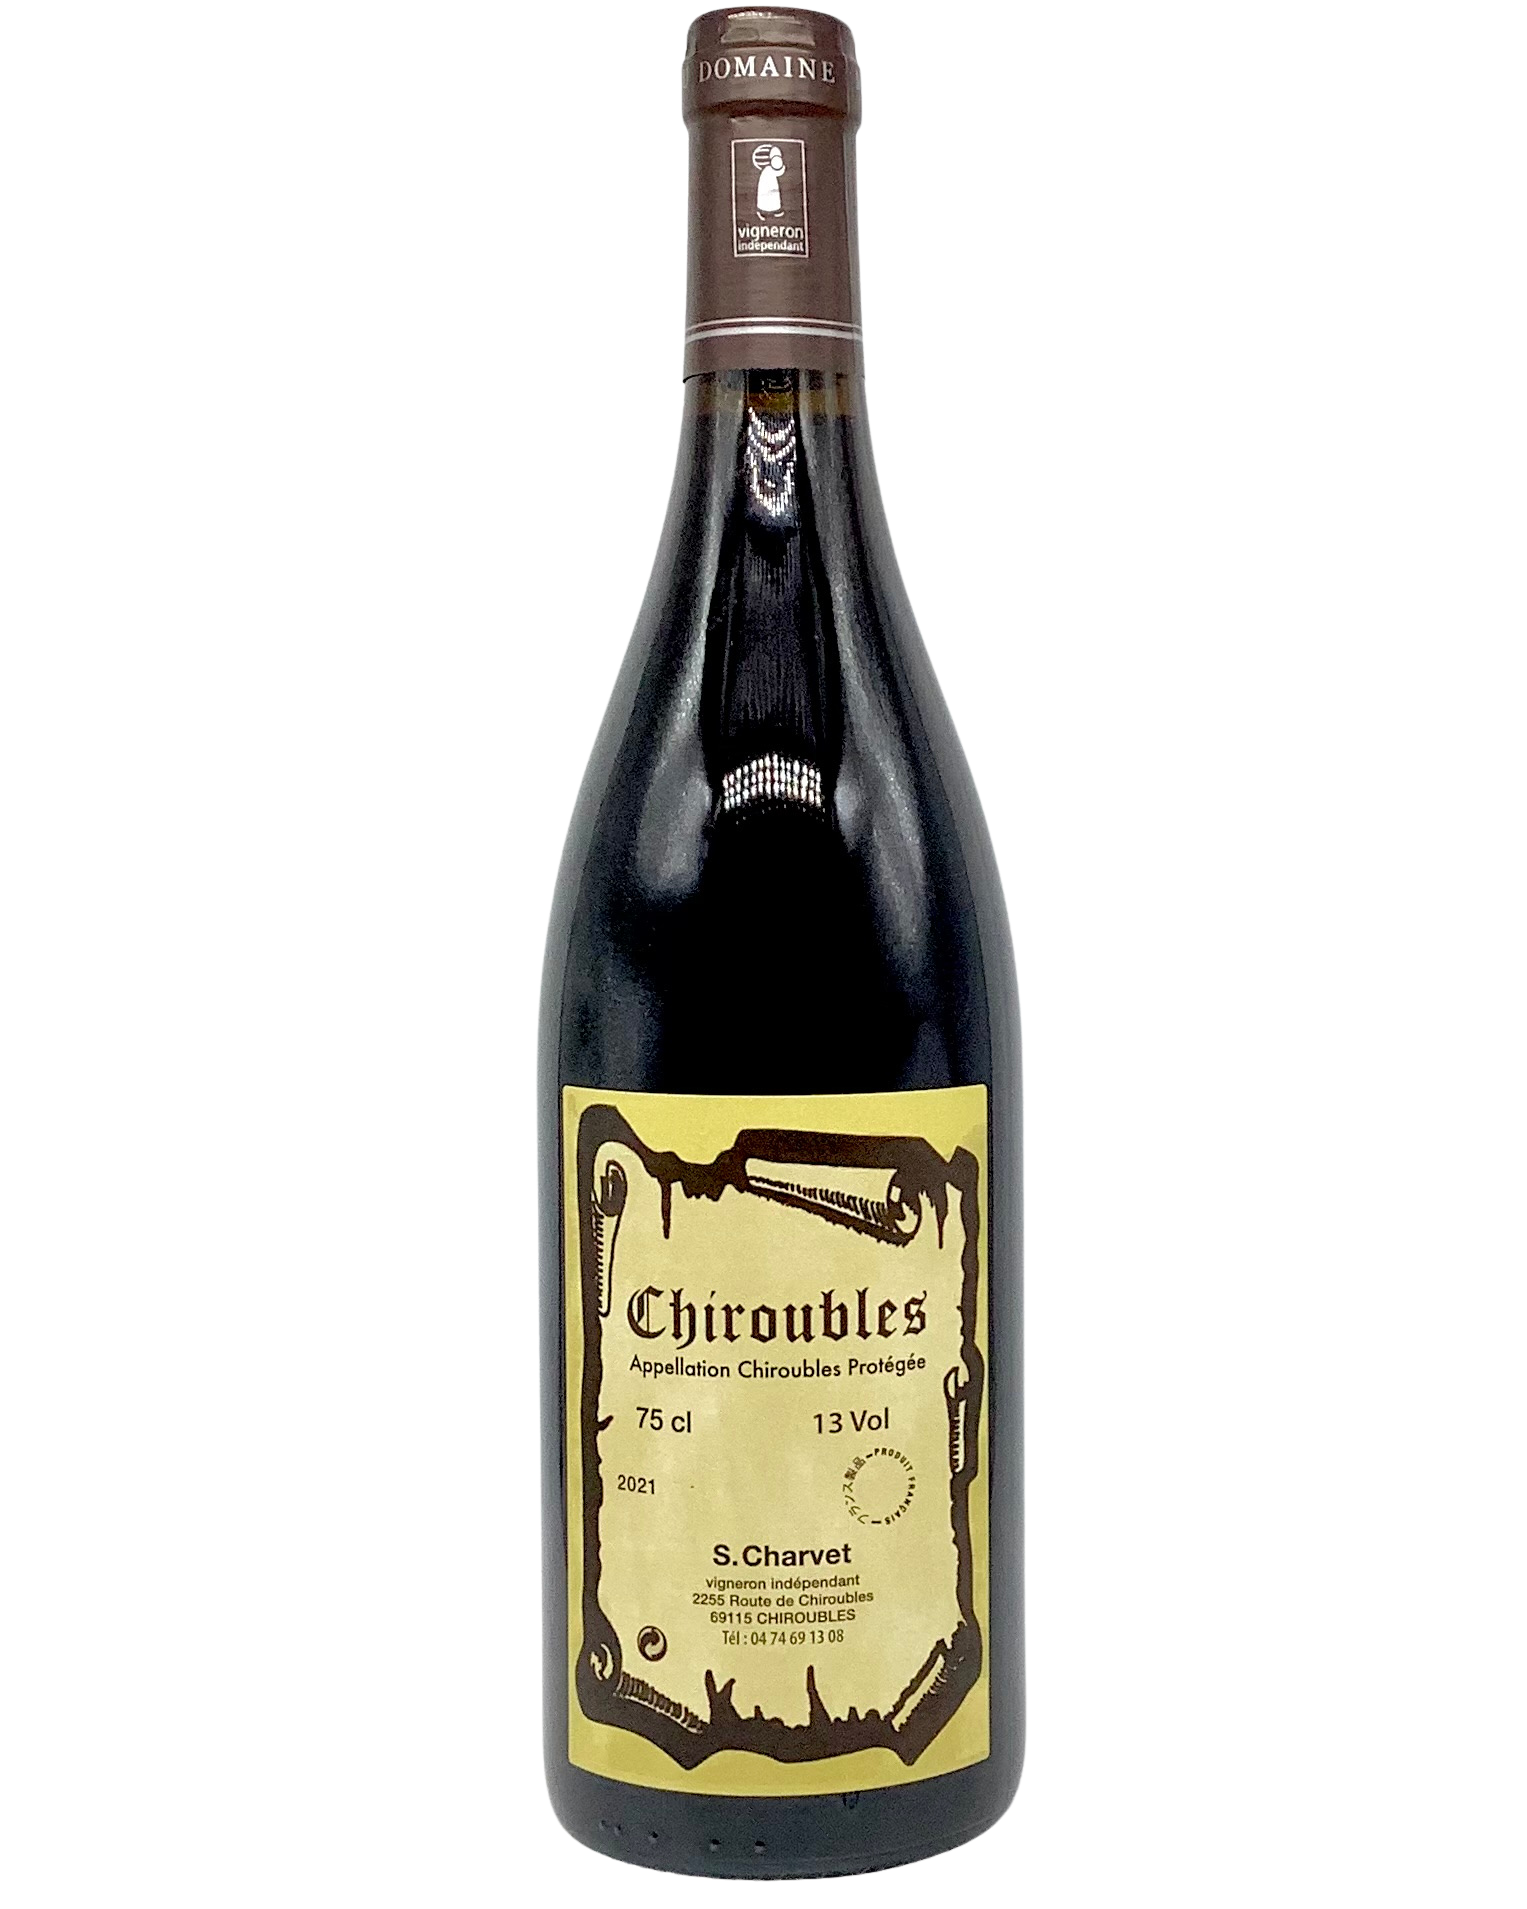 Steeve Charvet, Gamay, Chiroubles, Beaujolais, France 2021 newarrival